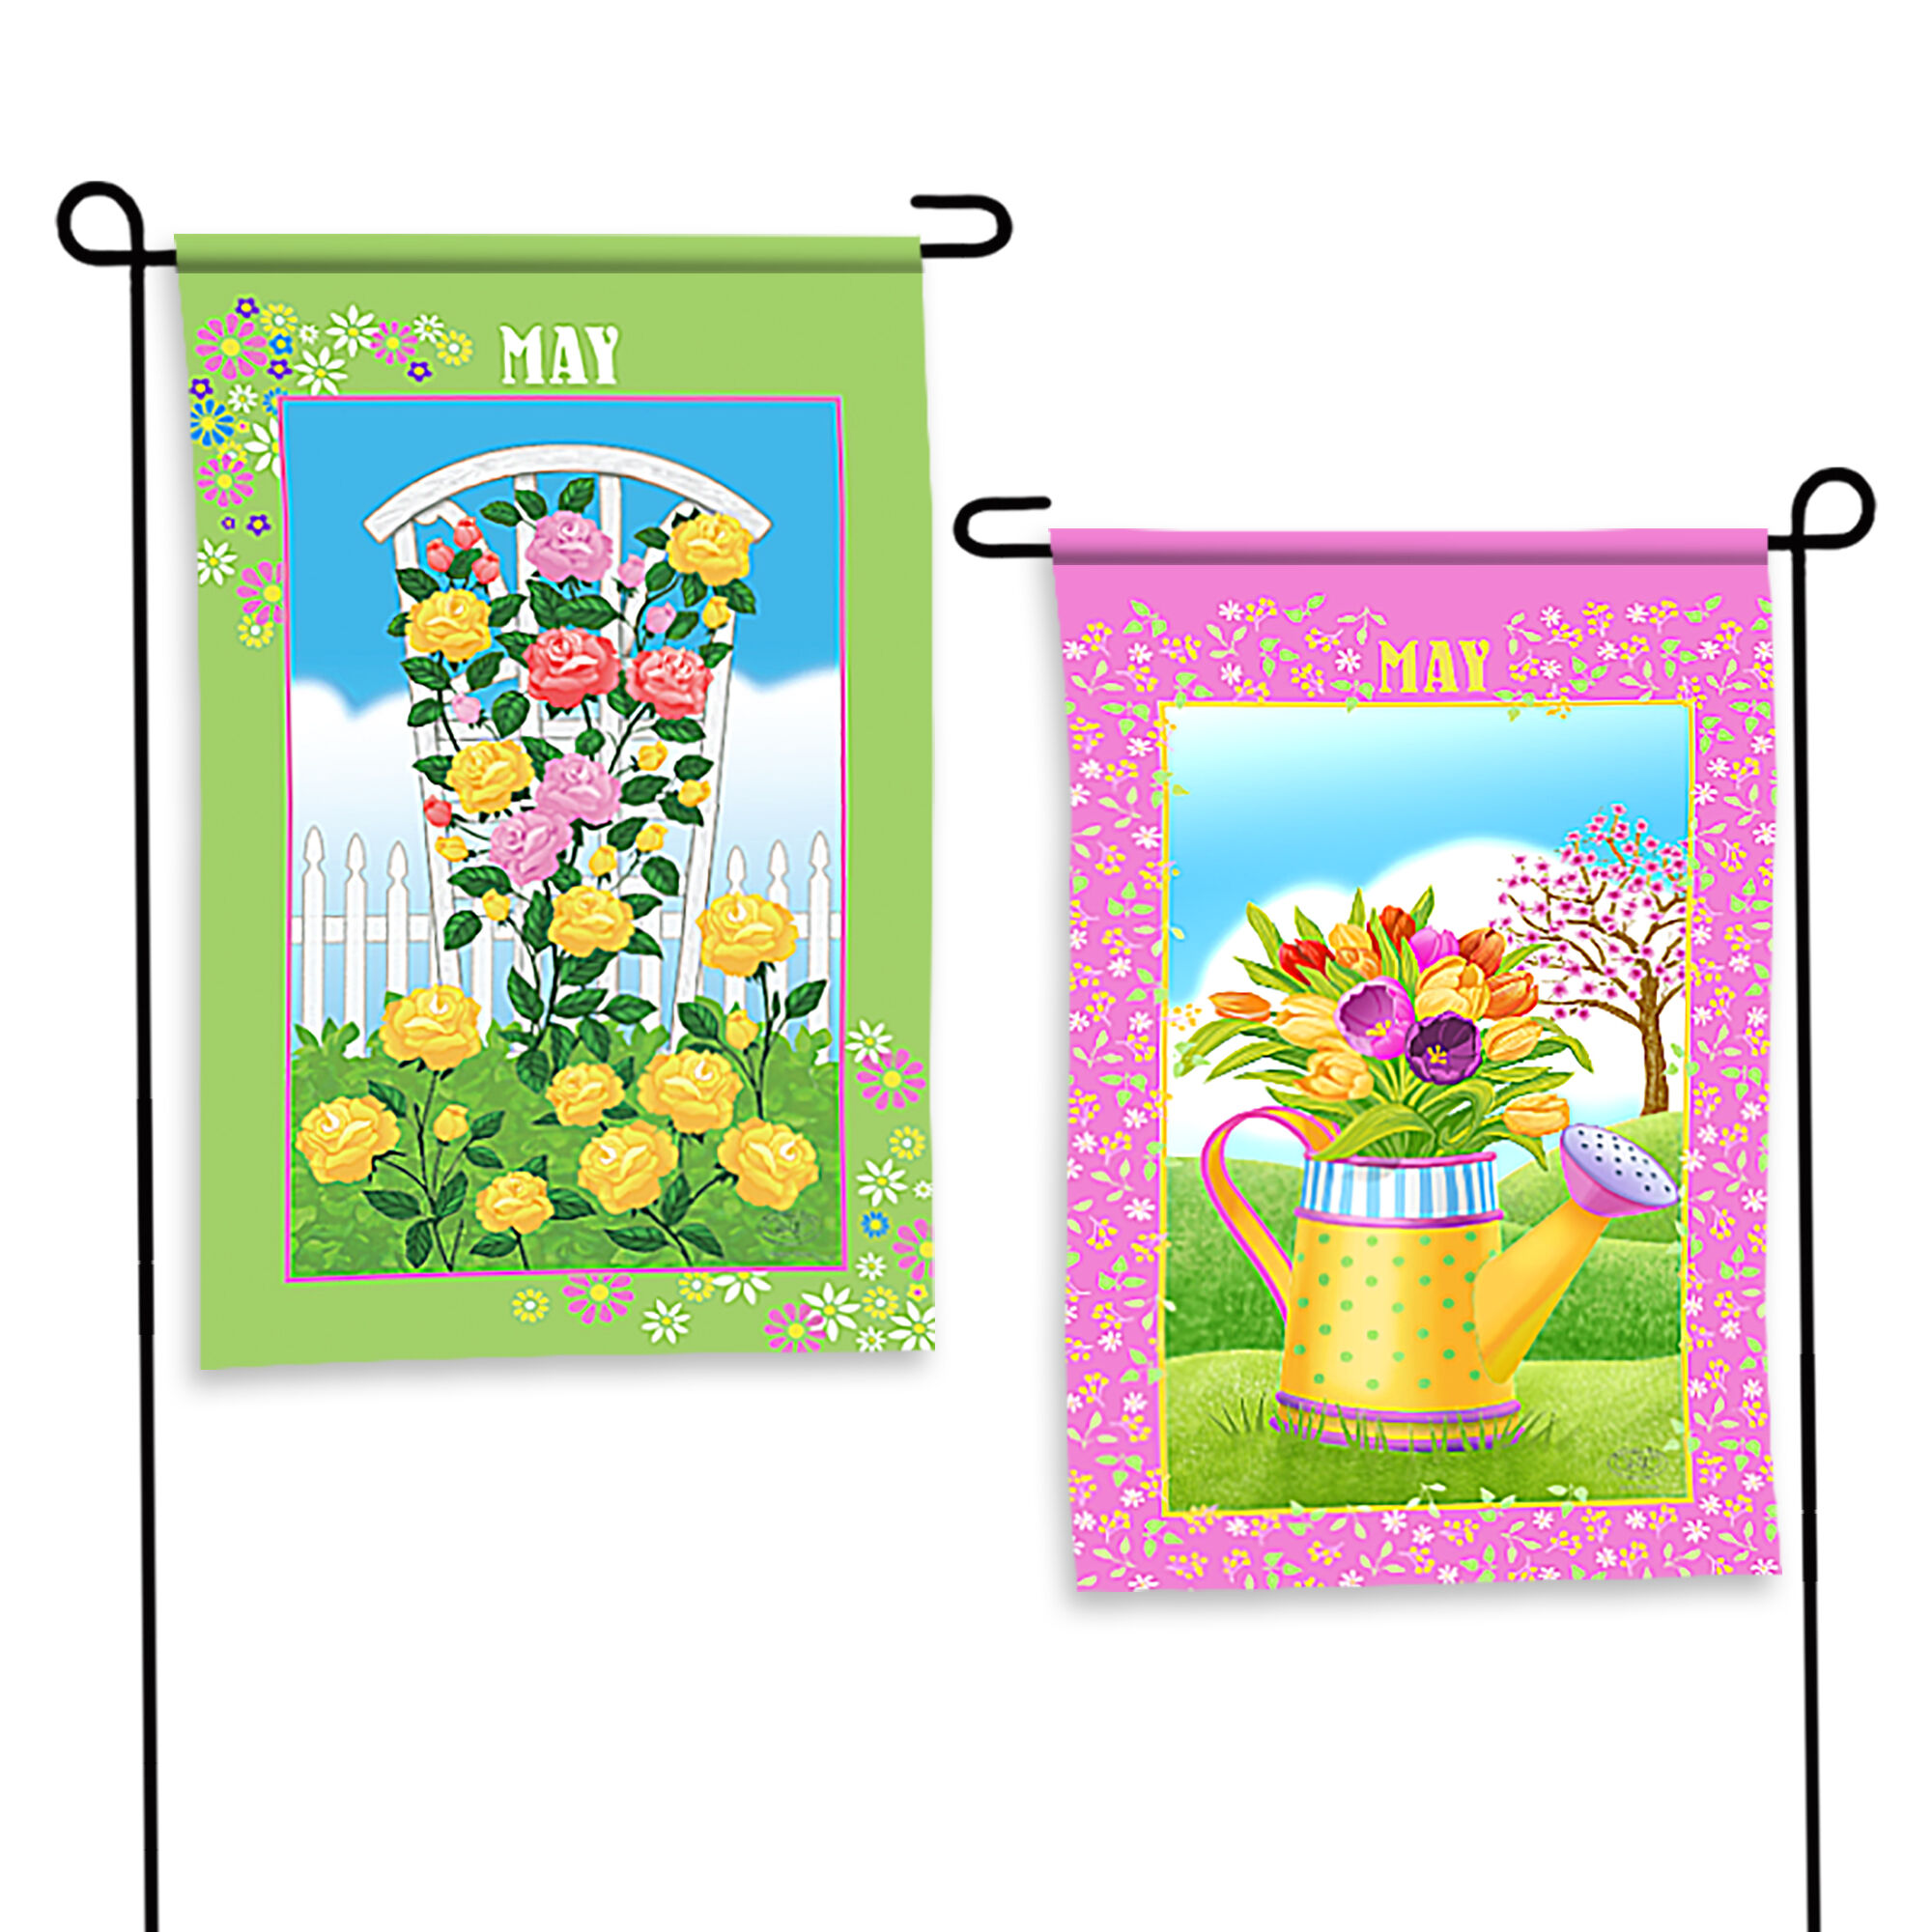 Year of Cheer Garden Flags 6547 0015 a May